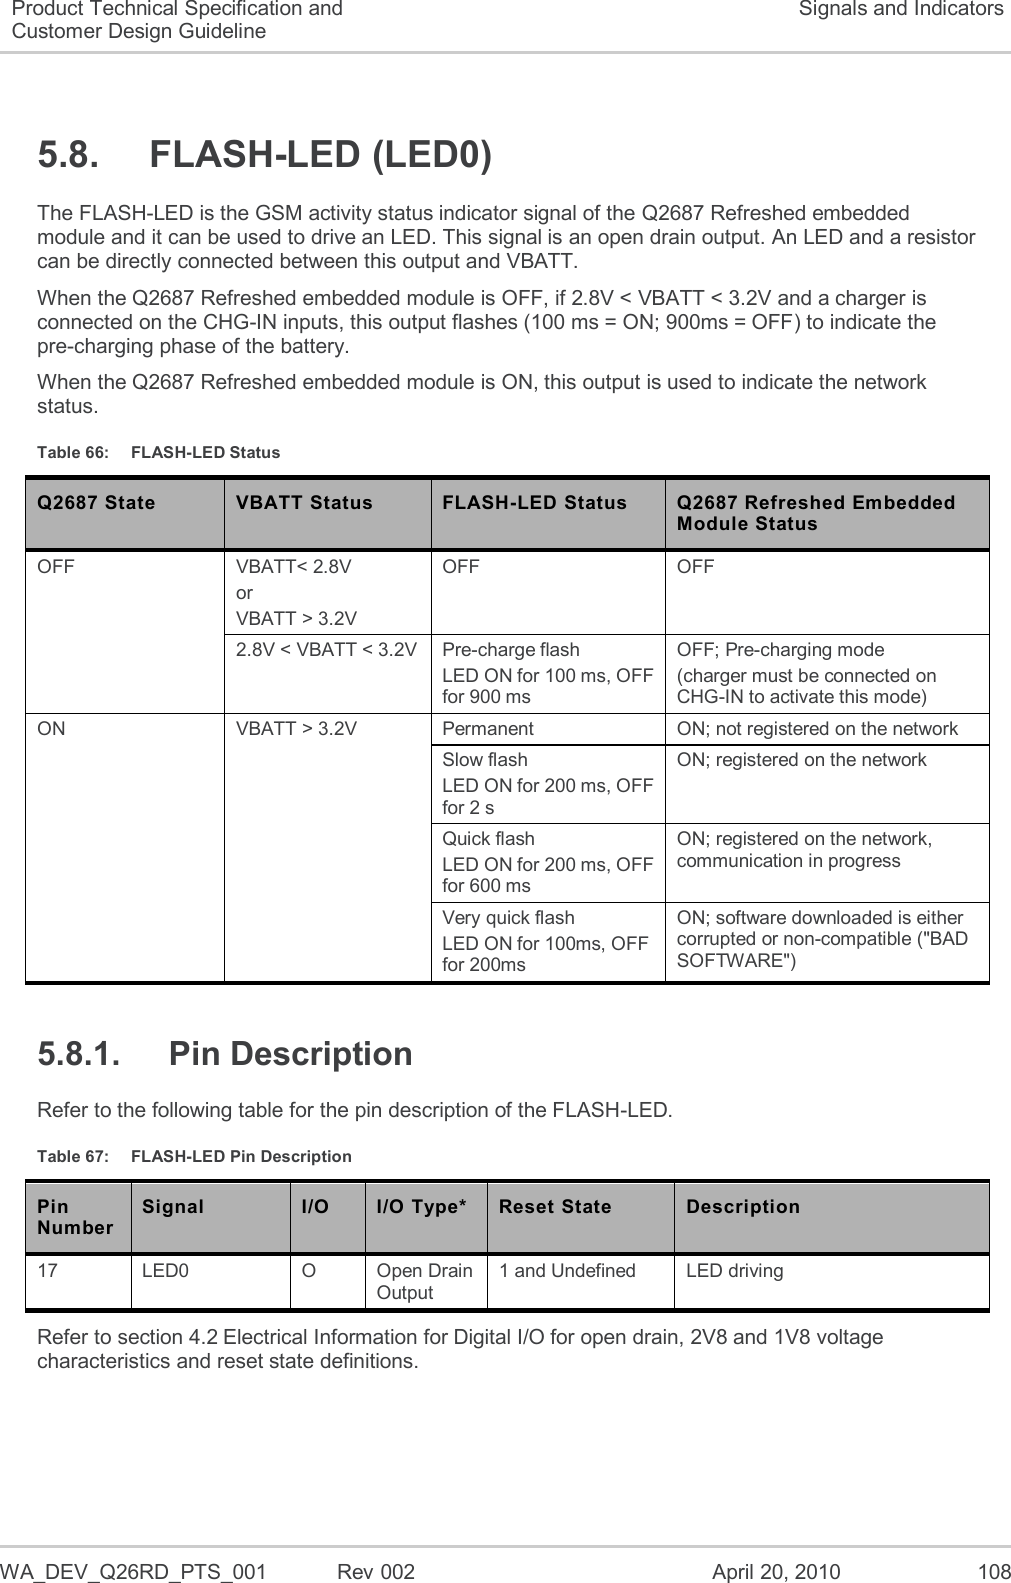   WA_DEV_Q26RD_PTS_001  Rev 002  April 20, 2010 108 Product Technical Specification and Customer Design Guideline Signals and Indicators 5.8.  FLASH-LED (LED0) The FLASH-LED is the GSM activity status indicator signal of the Q2687 Refreshed embedded module and it can be used to drive an LED. This signal is an open drain output. An LED and a resistor can be directly connected between this output and VBATT. When the Q2687 Refreshed embedded module is OFF, if 2.8V &lt; VBATT &lt; 3.2V and a charger is connected on the CHG-IN inputs, this output flashes (100 ms = ON; 900ms = OFF) to indicate the pre-charging phase of the battery. When the Q2687 Refreshed embedded module is ON, this output is used to indicate the network status. Table 66:  FLASH-LED Status Q2687 State VBATT Status FLASH-LED Status Q2687 Refreshed Embedded Module Status OFF  VBATT&lt; 2.8V or VBATT &gt; 3.2V OFF OFF 2.8V &lt; VBATT &lt; 3.2V Pre-charge flash LED ON for 100 ms, OFF for 900 ms OFF; Pre-charging mode (charger must be connected on CHG-IN to activate this mode) ON  VBATT &gt; 3.2V Permanent ON; not registered on the network Slow flash LED ON for 200 ms, OFF for 2 s ON; registered on the network Quick flash LED ON for 200 ms, OFF for 600 ms ON; registered on the network, communication in progress Very quick flash LED ON for 100ms, OFF for 200ms ON; software downloaded is either corrupted or non-compatible (&quot;BAD SOFTWARE&quot;) 5.8.1.  Pin Description Refer to the following table for the pin description of the FLASH-LED. Table 67:  FLASH-LED Pin Description Pin Number Signal I/O I/O Type* Reset State Description 17 LED0 O Open Drain Output 1 and Undefined LED driving Refer to section 4.2 Electrical Information for Digital I/O for open drain, 2V8 and 1V8 voltage characteristics and reset state definitions. 